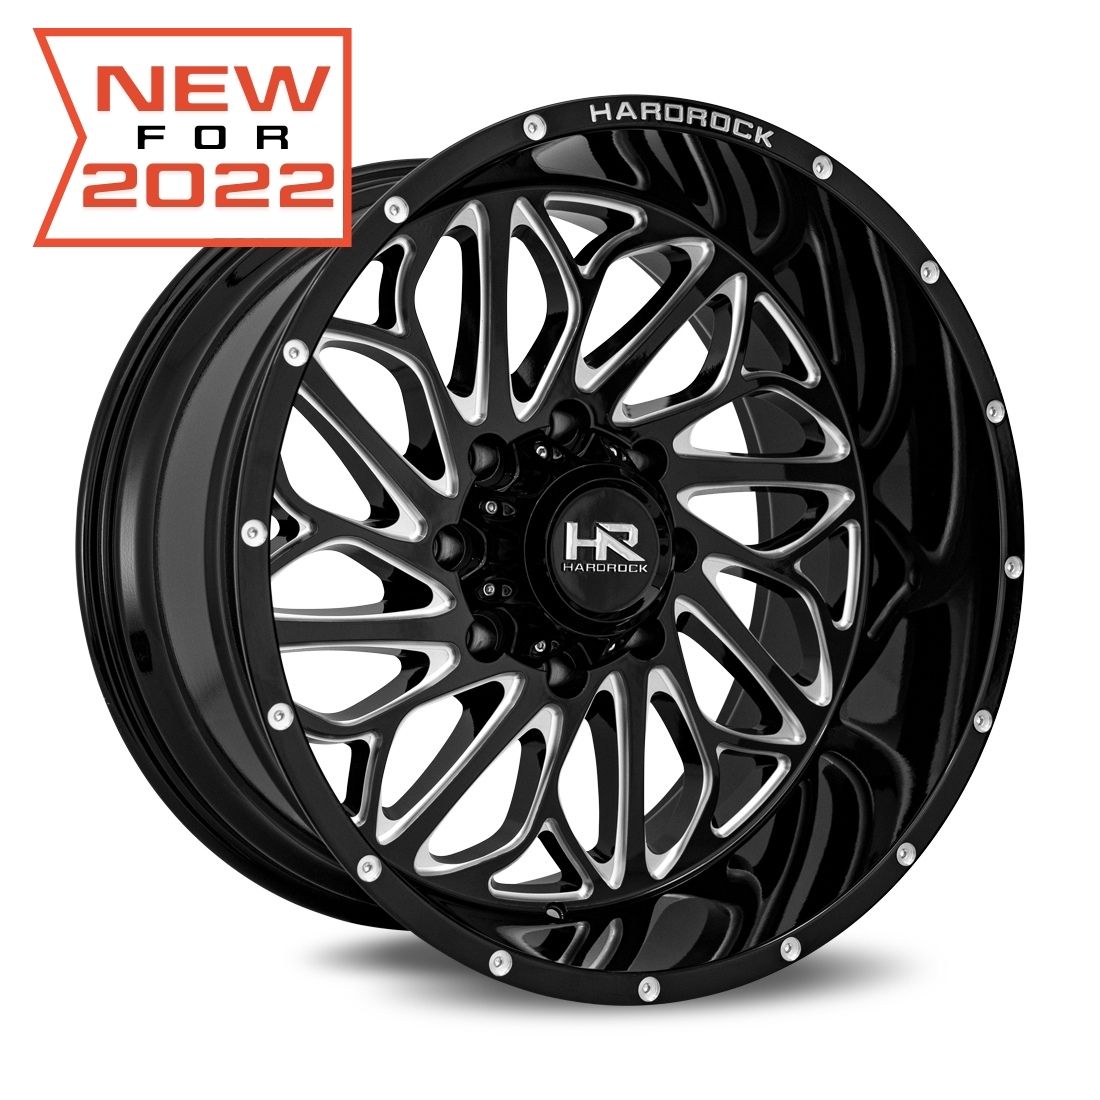 Hardrock Offroad H508 New For 2022